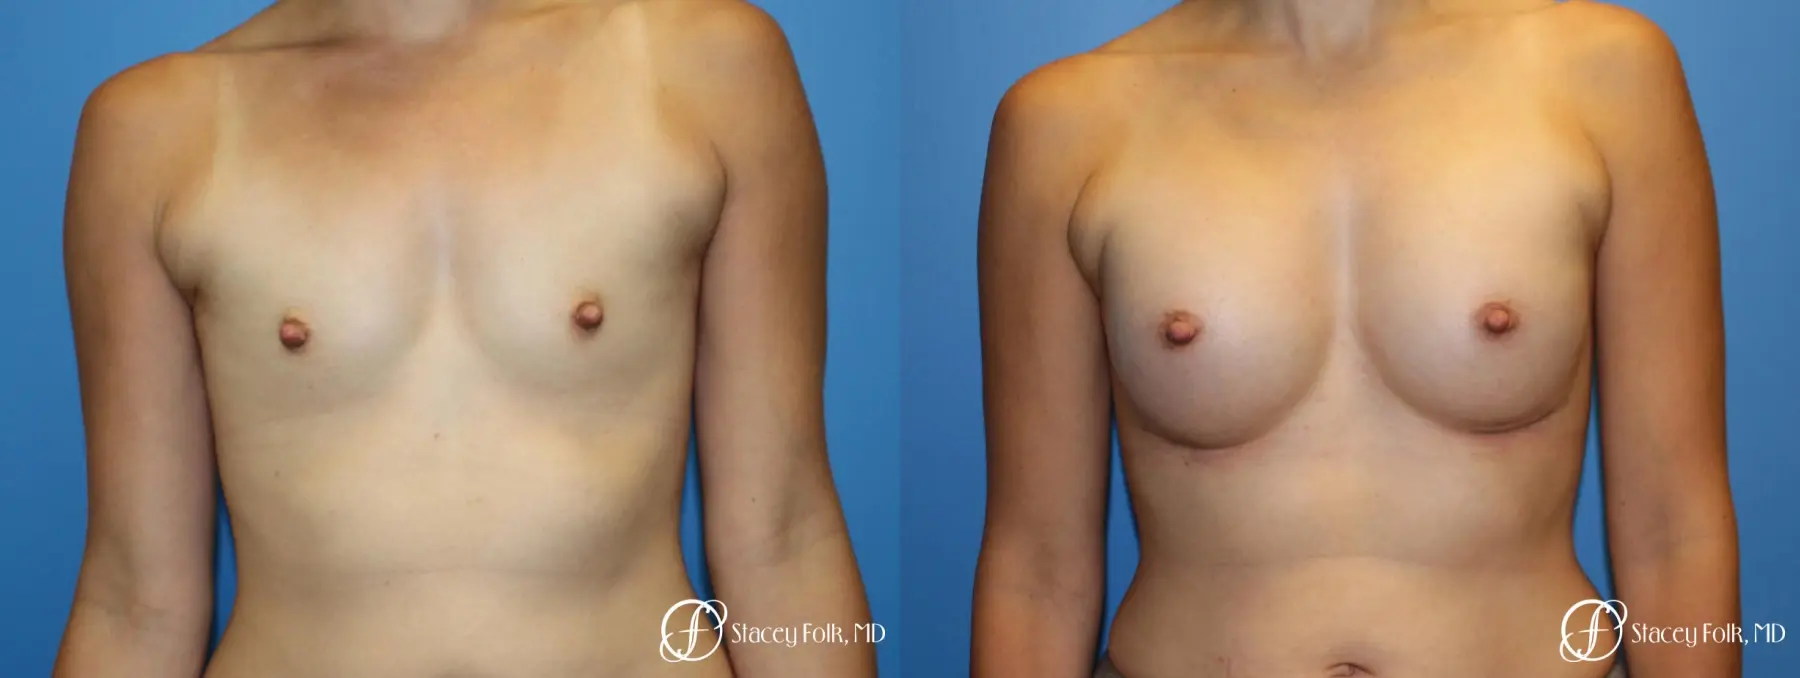 Denver Breast augmentation using textured anatomical implants 5849 - Before and After